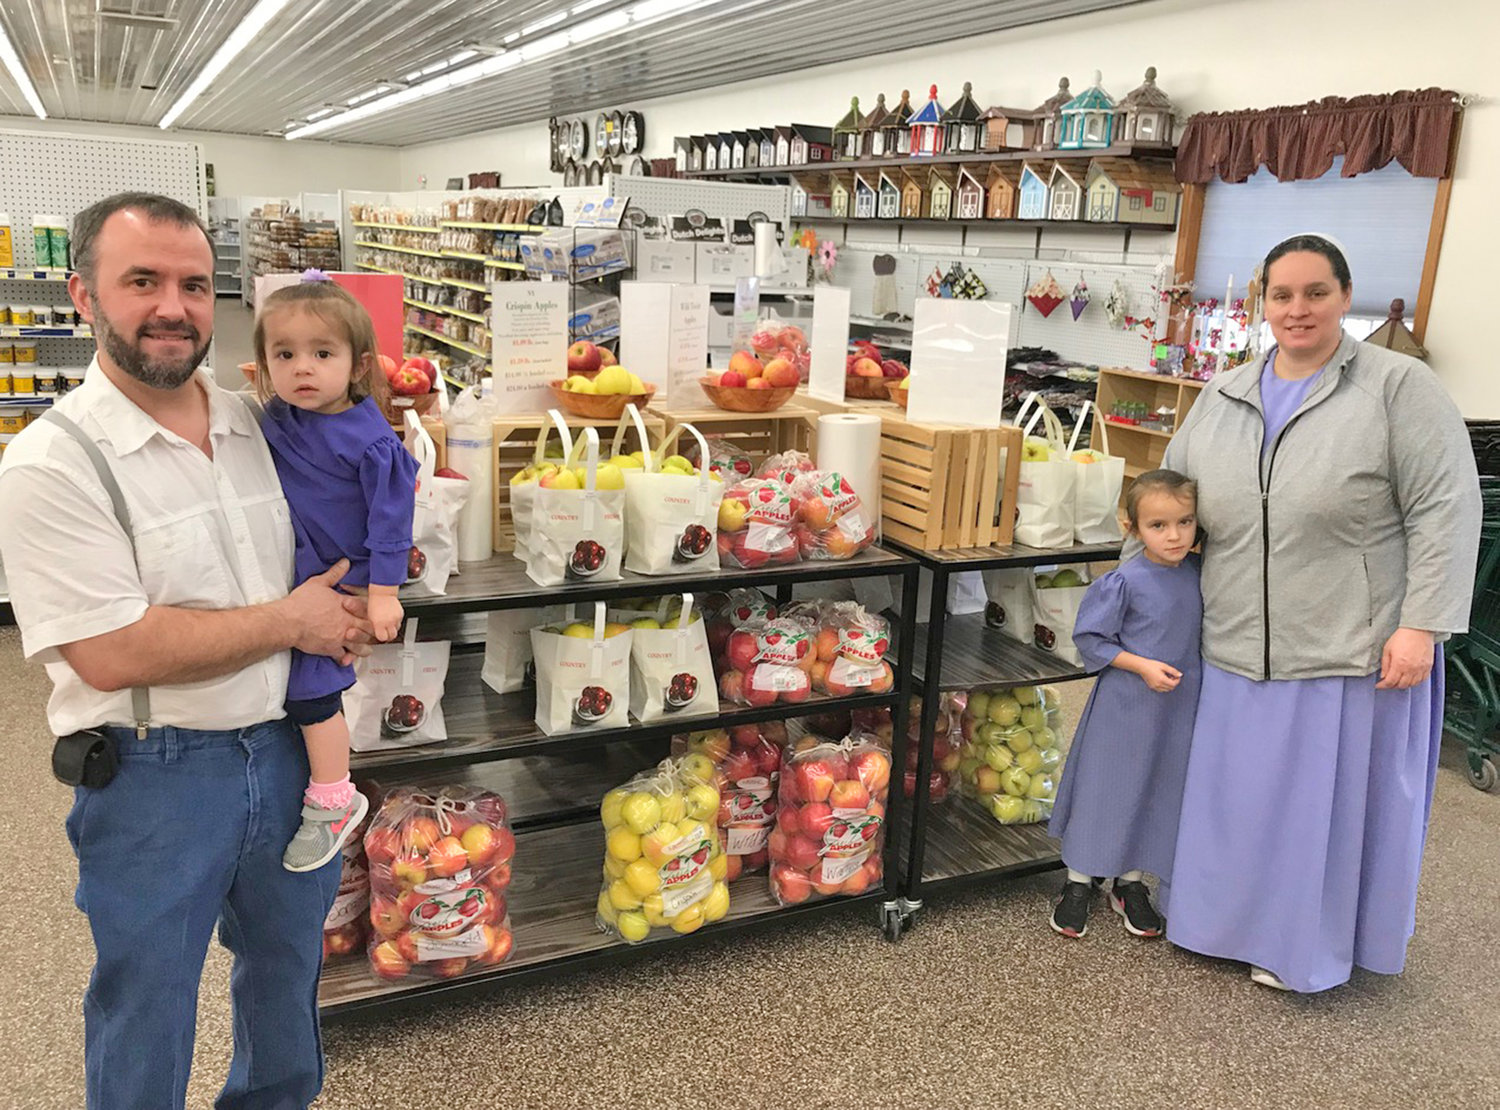 Olde Country Market owners Myron Stoltzfus and Regina Stoltzfus pose with daughters Lakeisha and Rainelle Monday, Jan. 30 at their Vernon store.